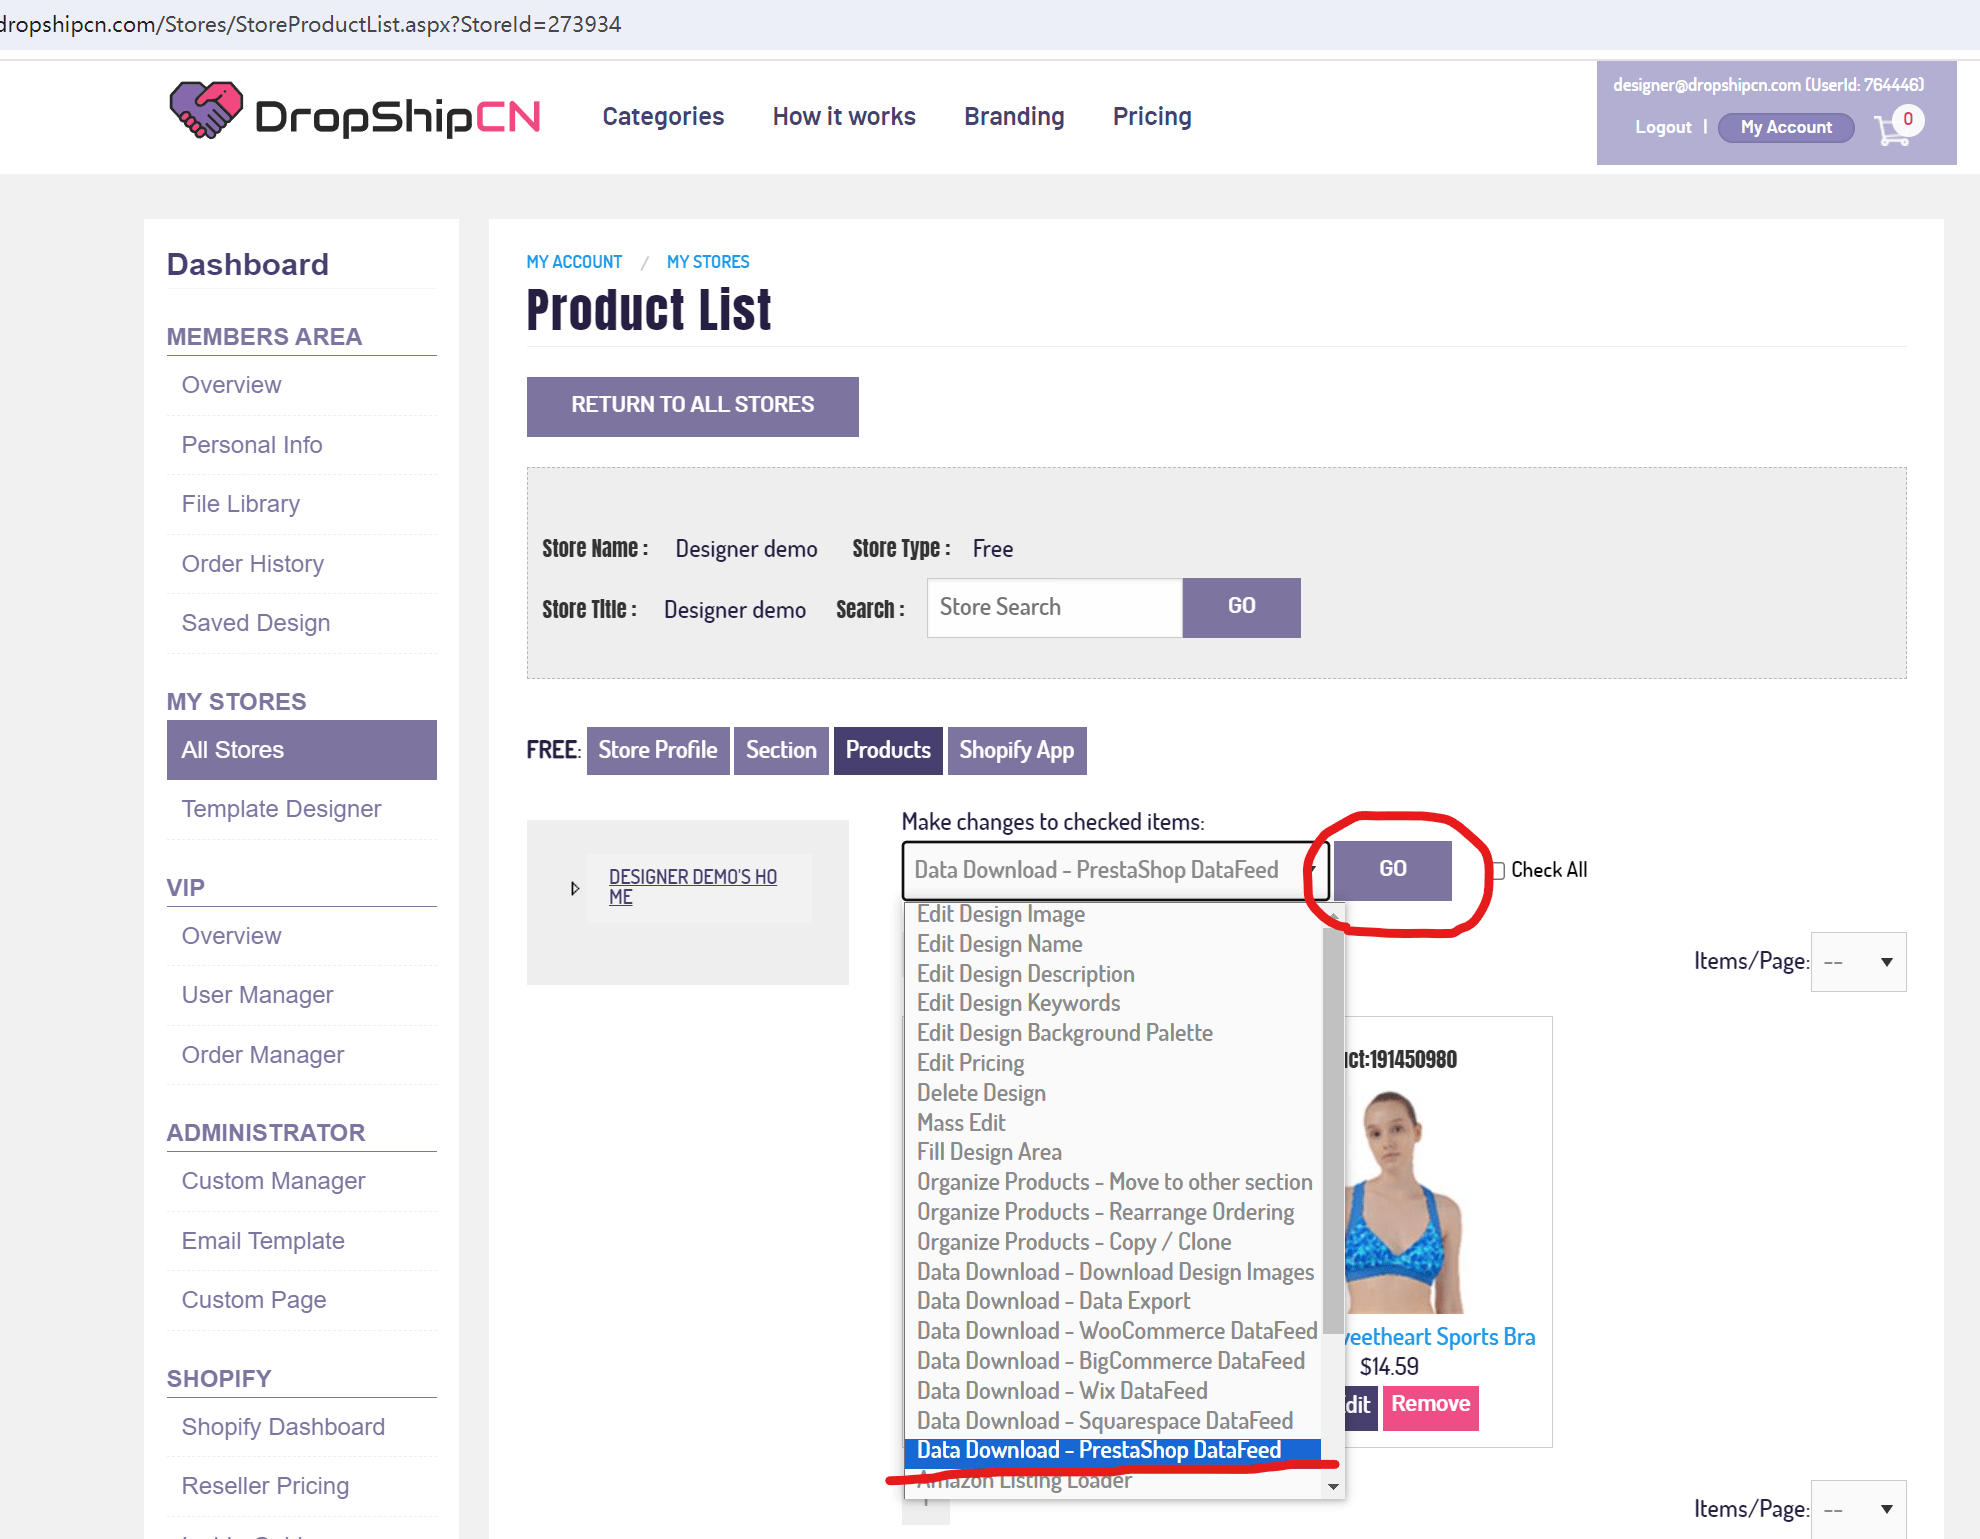 Export Products to PrestaShop Step1